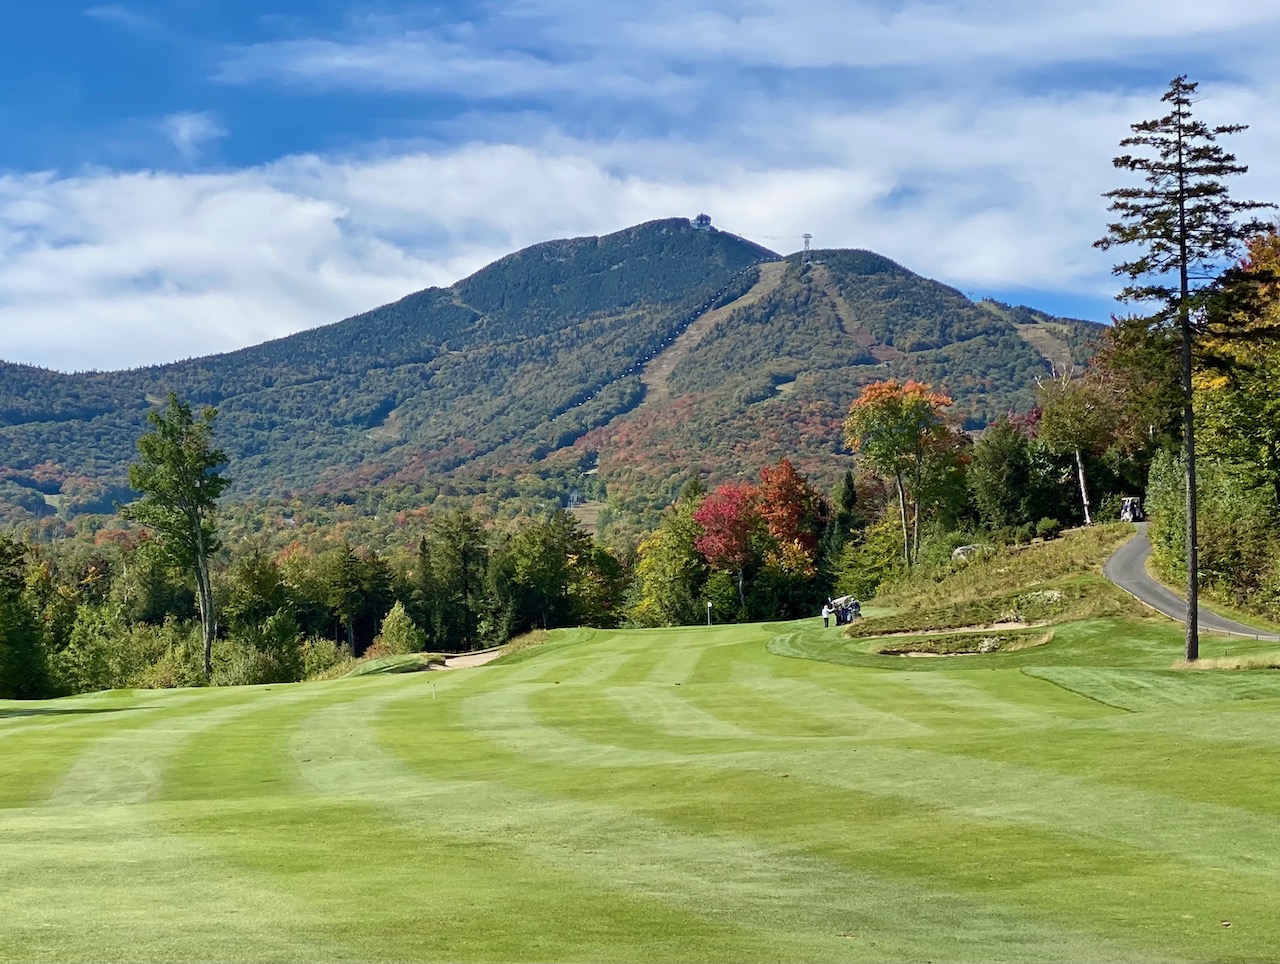 View of Jay Peak’s golf course